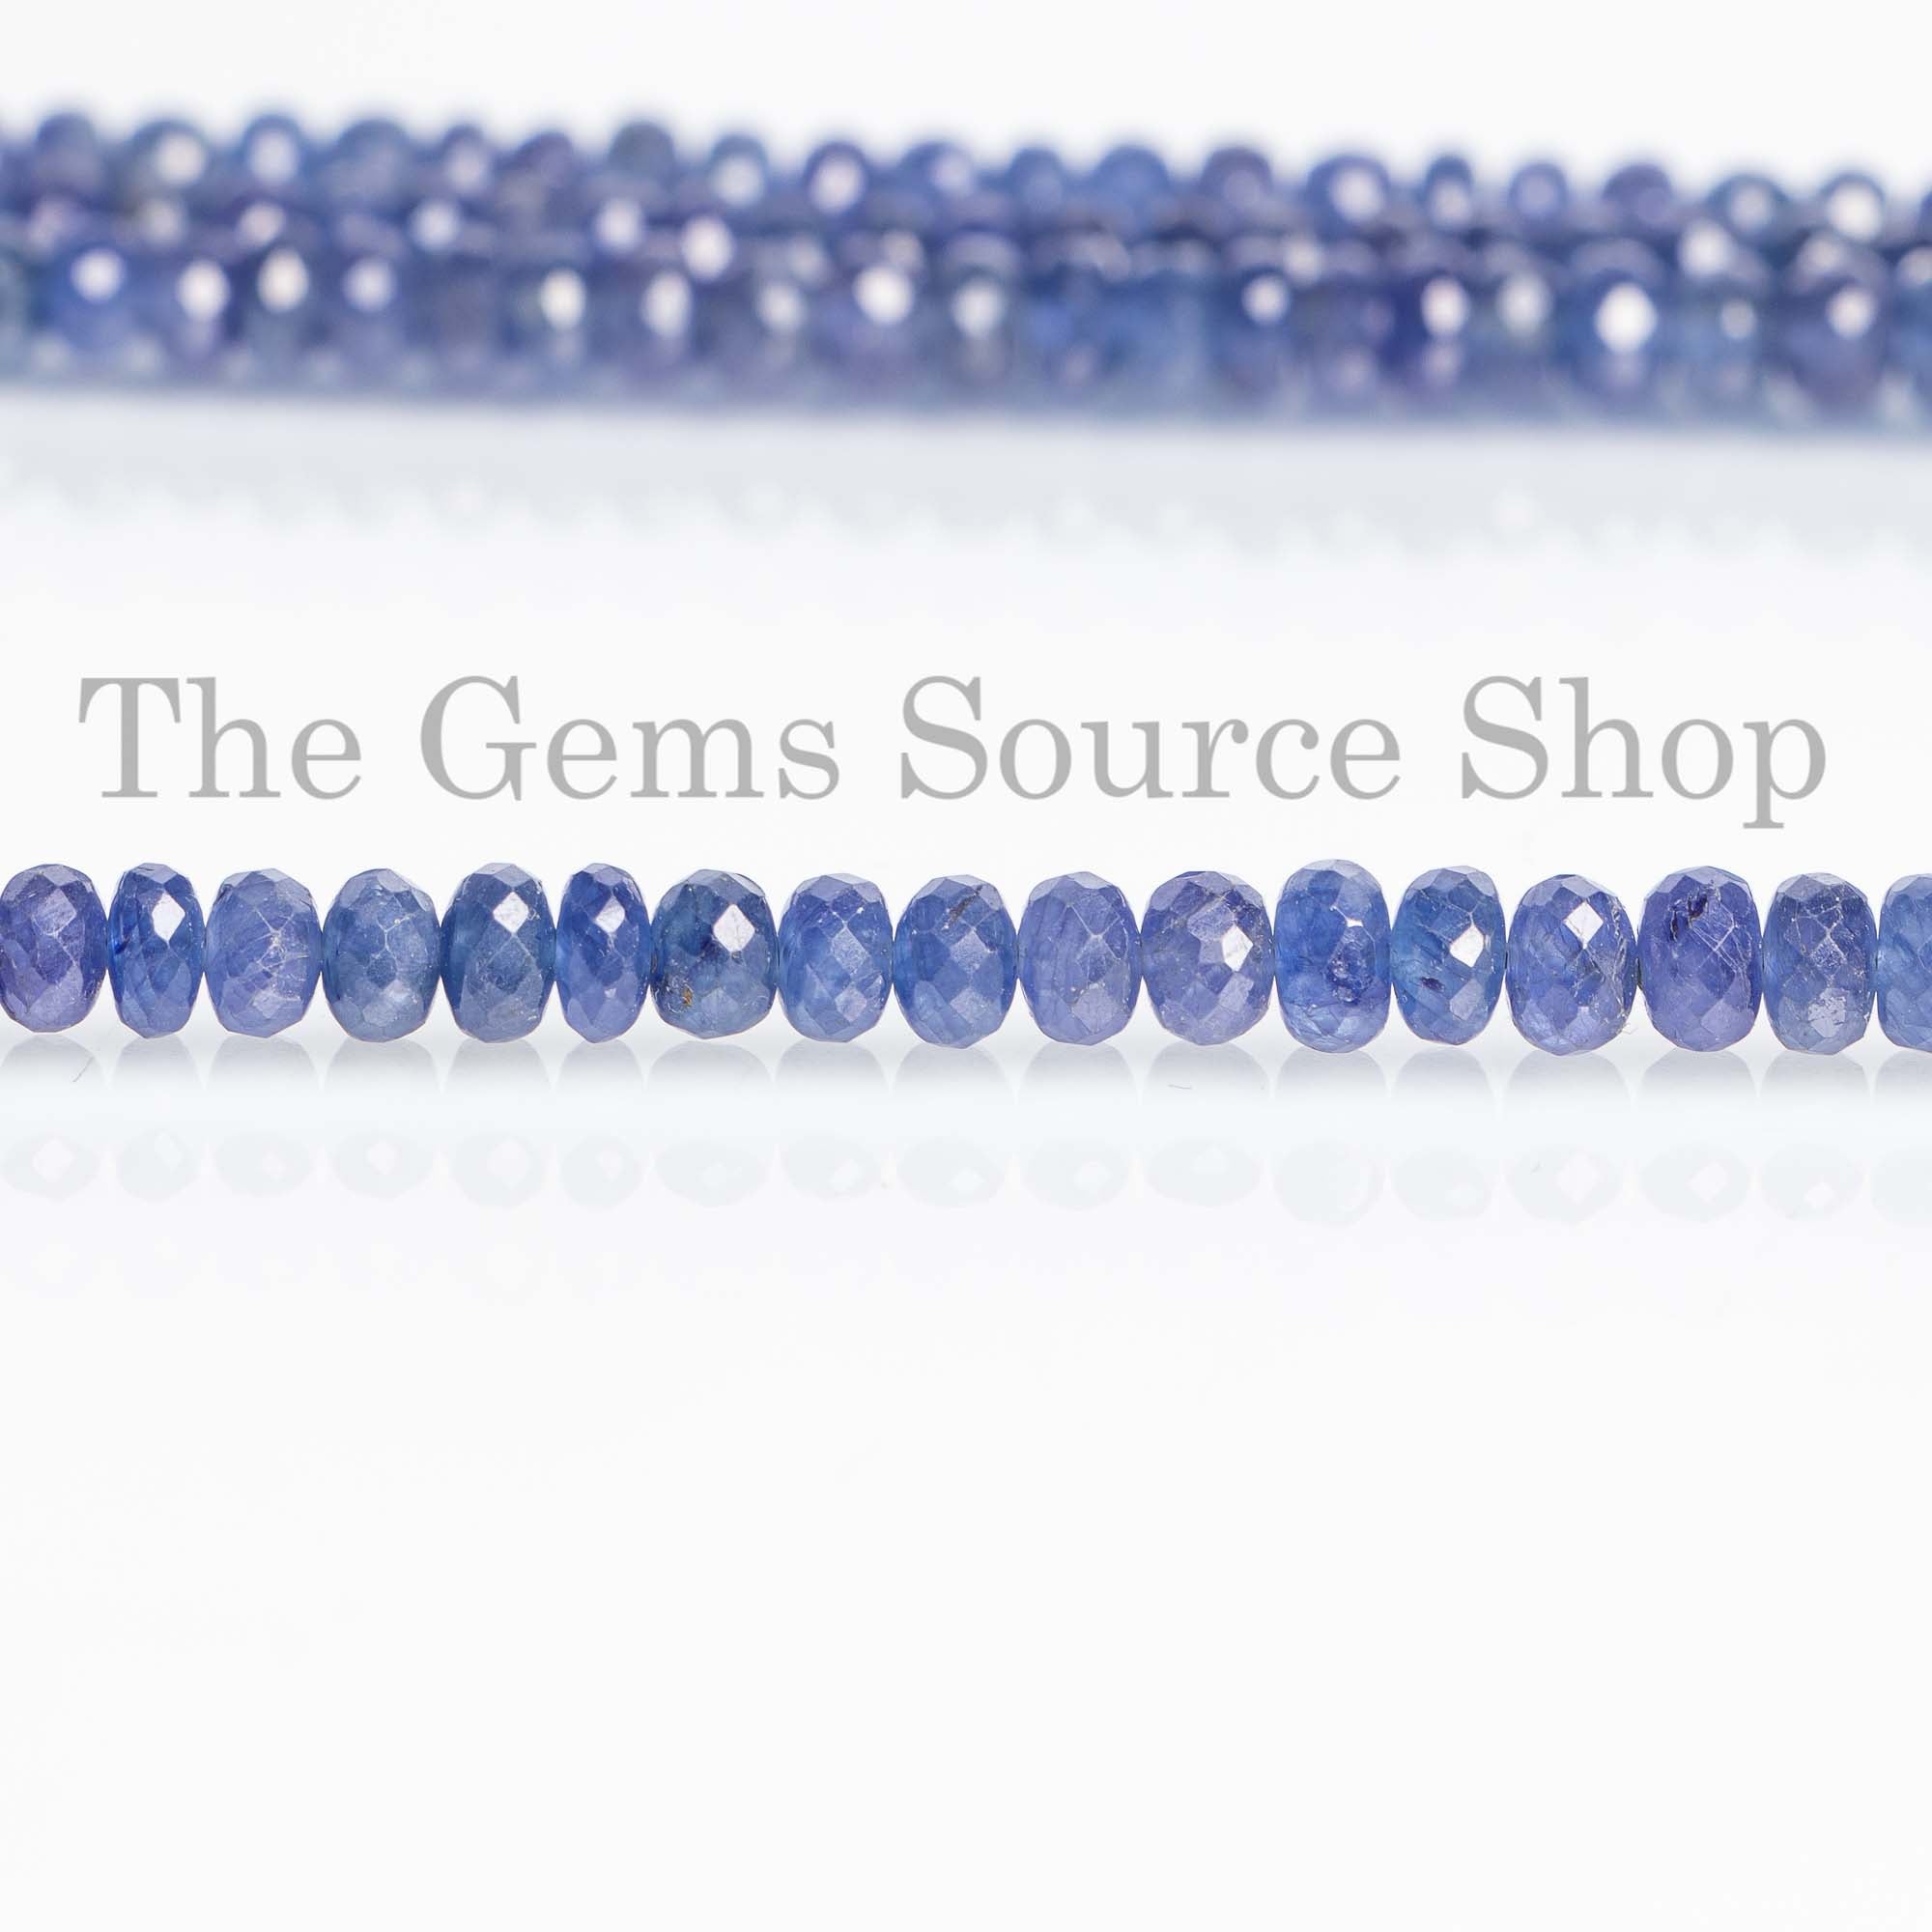 Blue Sapphire Beads Necklace, Sapphire Faceted Beads Necklace, Sapphire Rondelle Beads Necklace